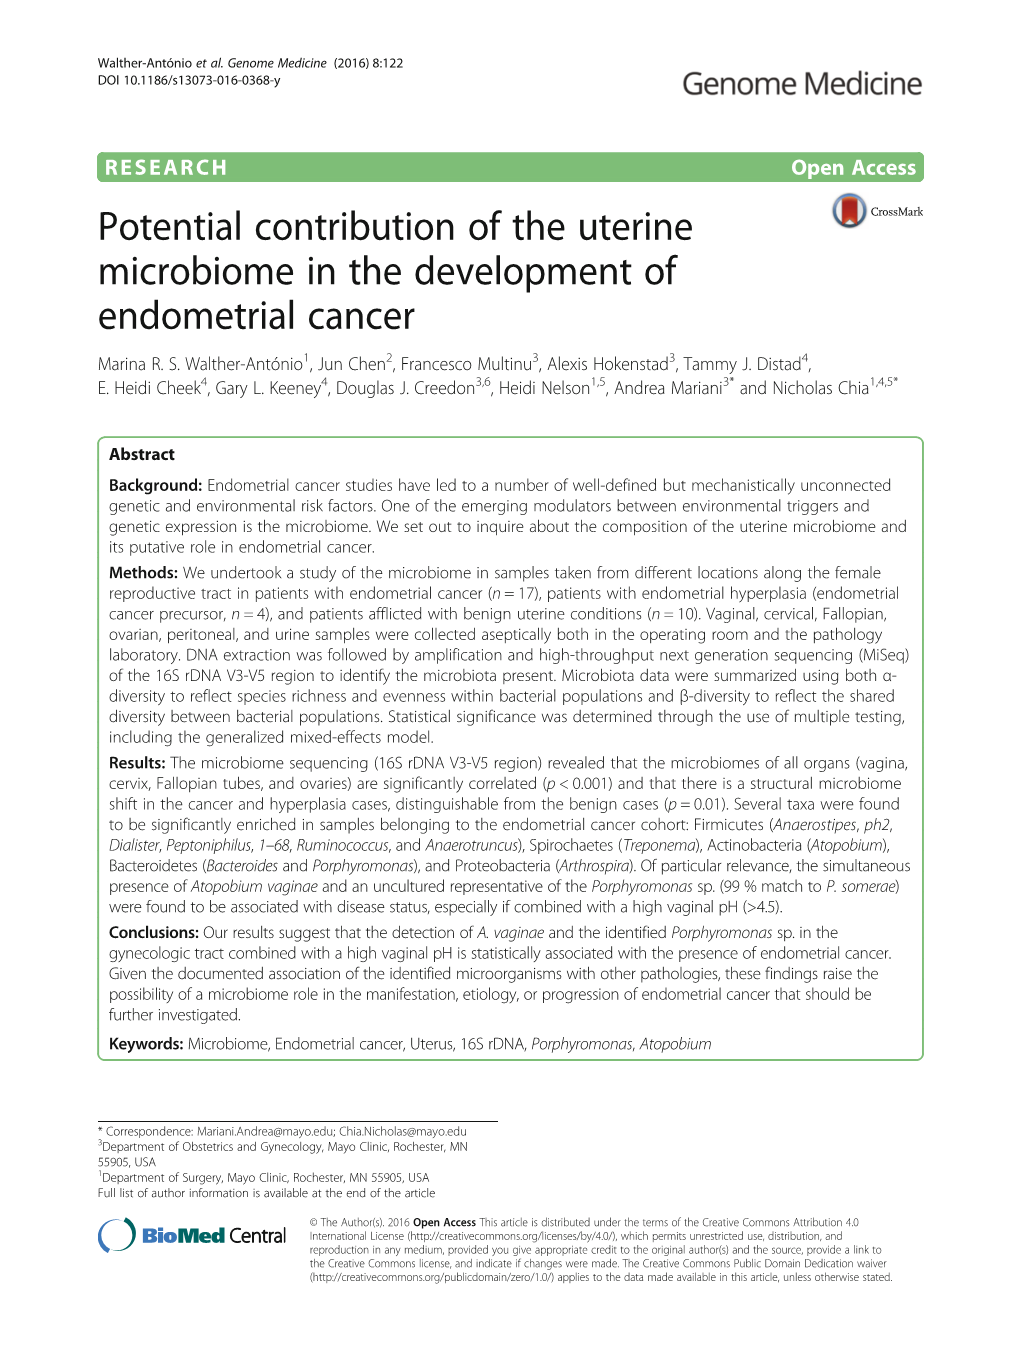 Potential Contribution of the Uterine Microbiome in the Development of Endometrial Cancer Marina R